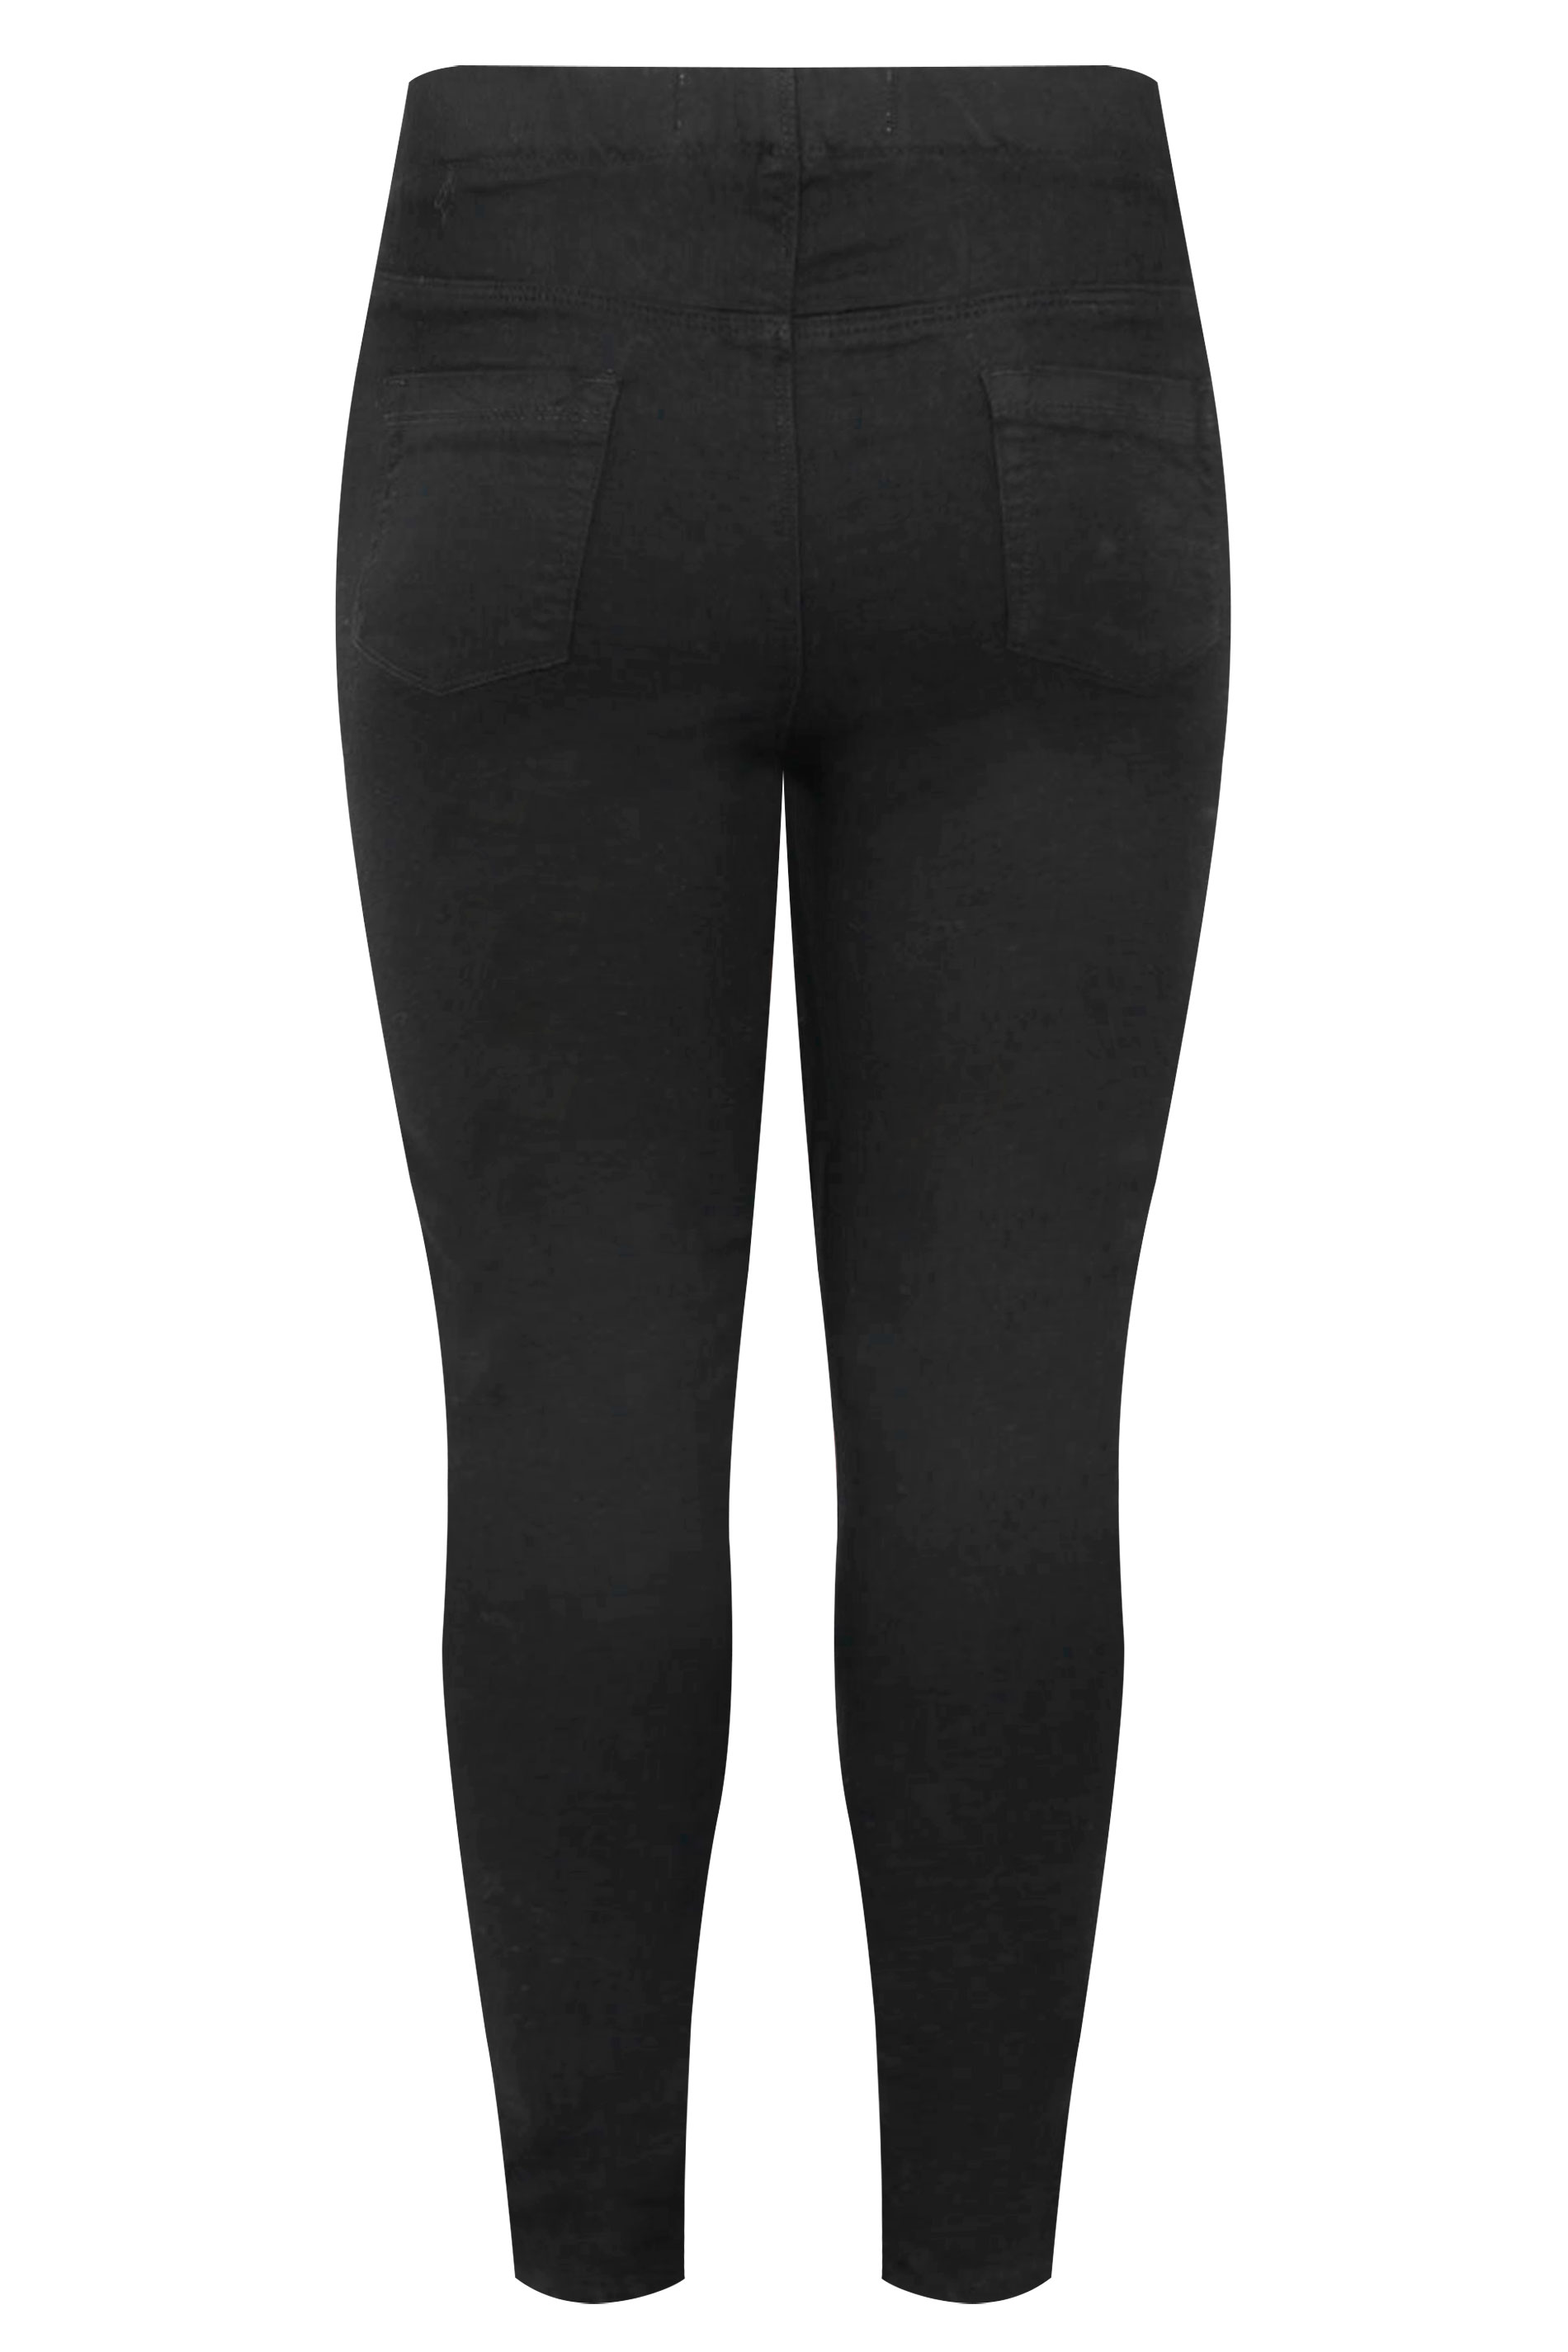 Plus Size Black Pull On Jeggings Yours Clothing